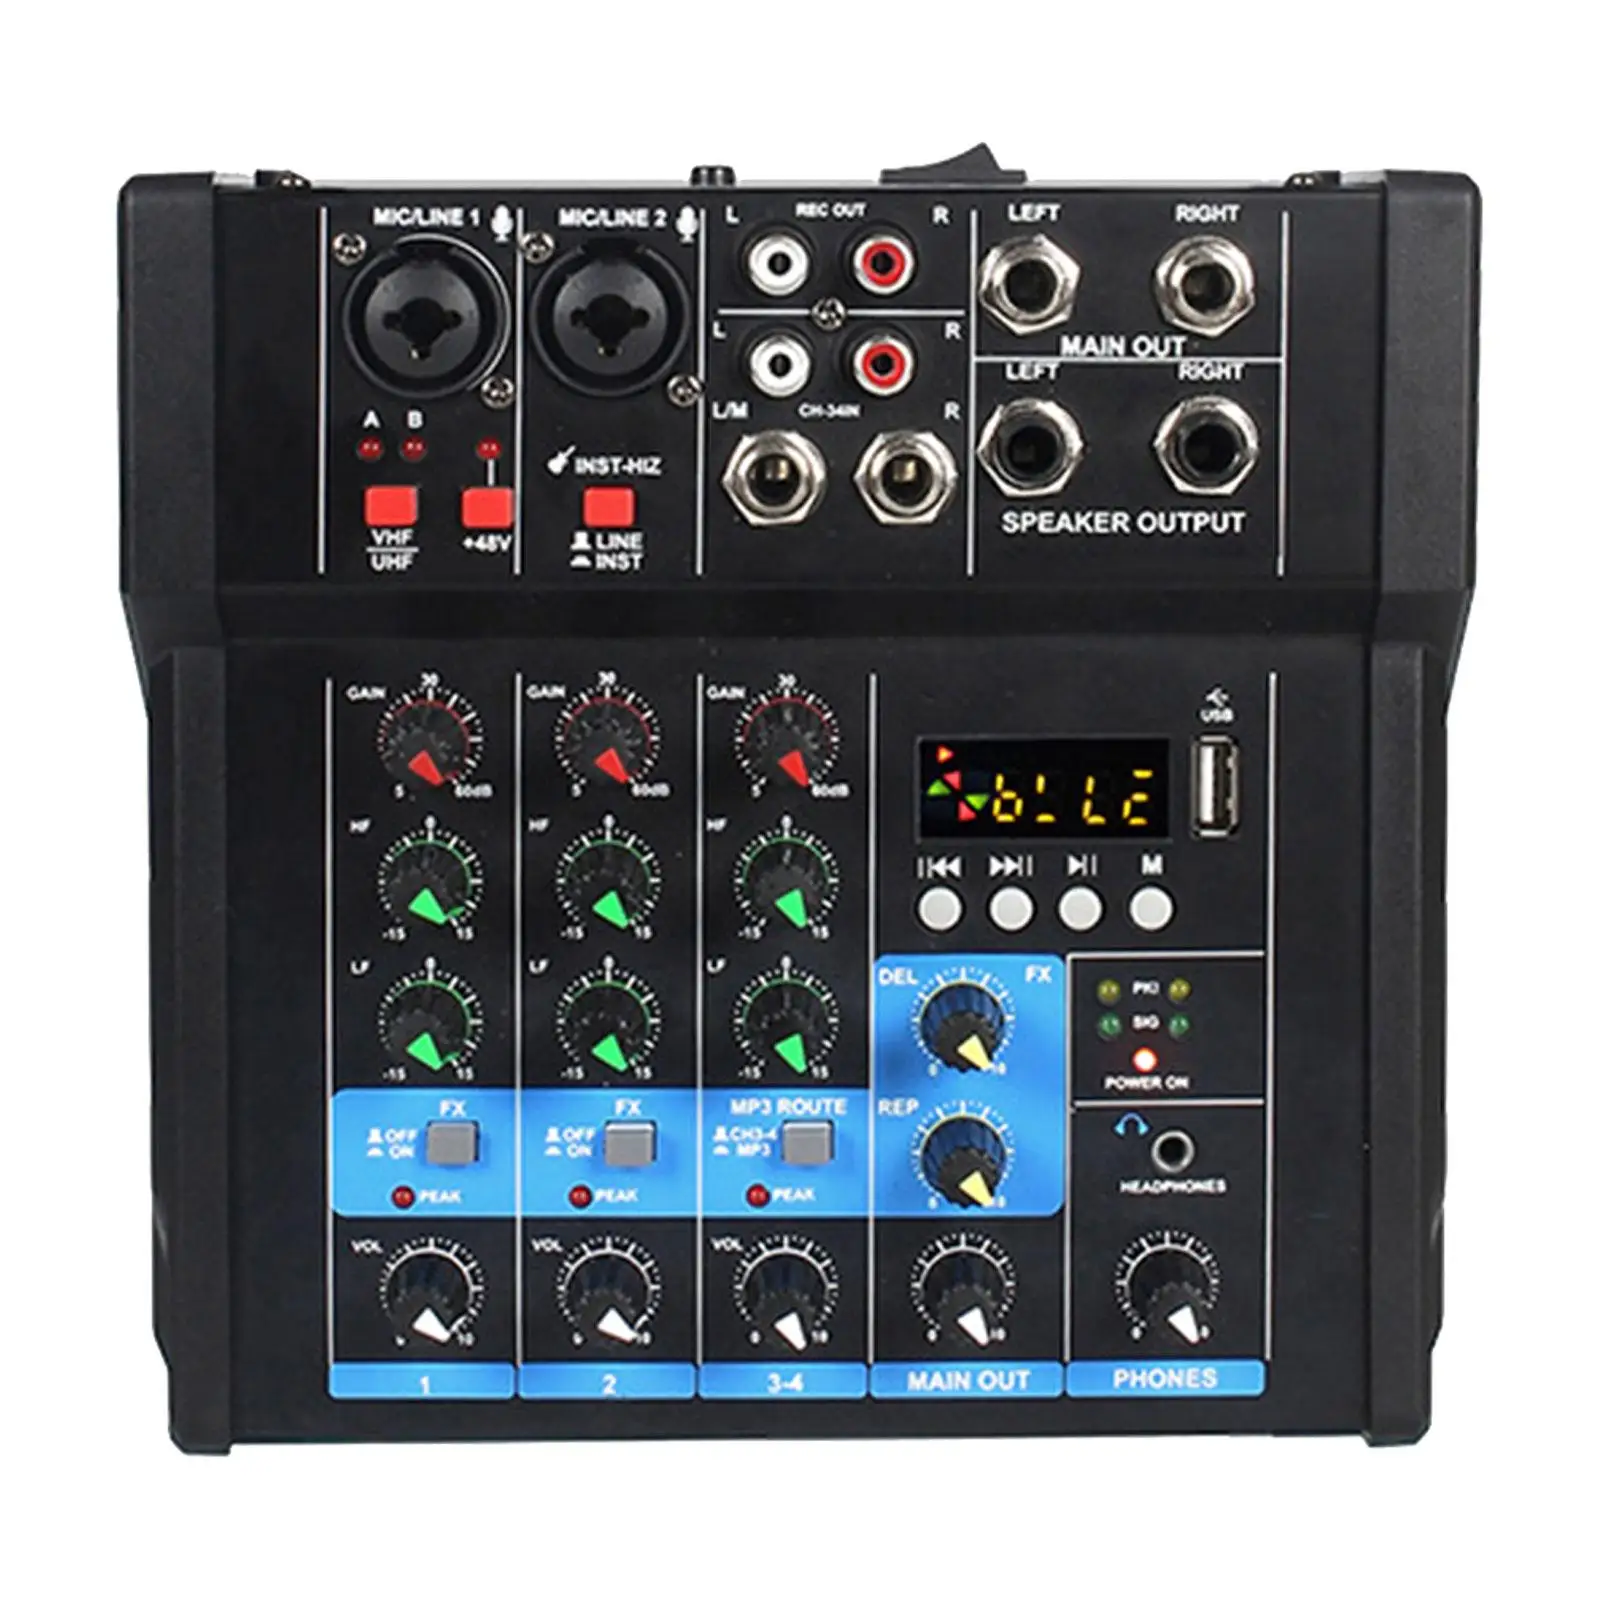 

Audio Mixer 4 Channel 48V Phantom Power Sound Board Console System DJ Mixer for Karaoke Live Streaming Recording Party DJ Mixing